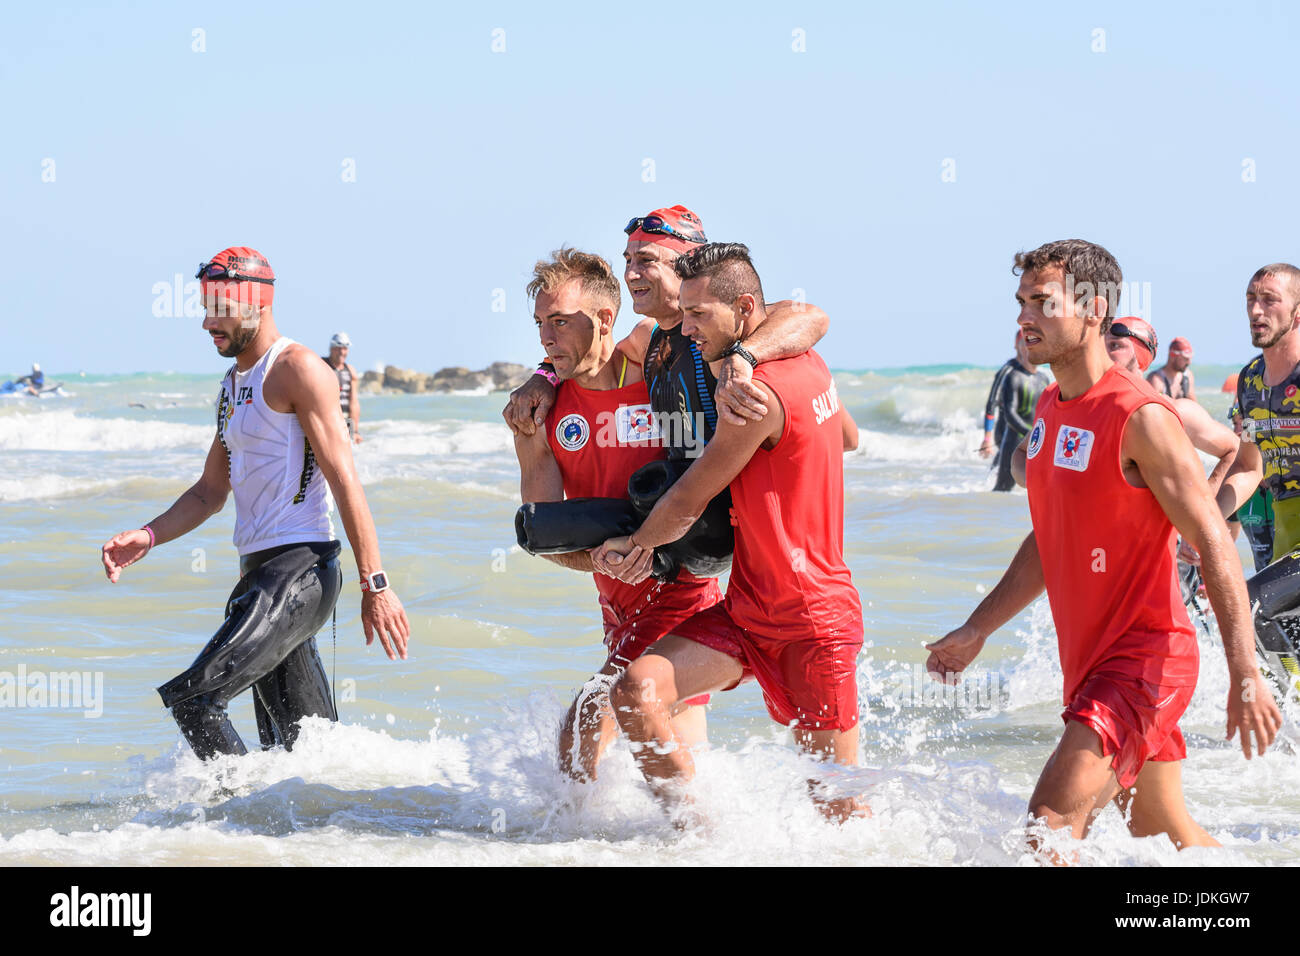 Pescara, Italy - June 18, 2017: Arrival for the swimming test of disabled athlete Alex Zanardi at Ironman 70.3 Pescara of June 18, 2017 Stock Photo